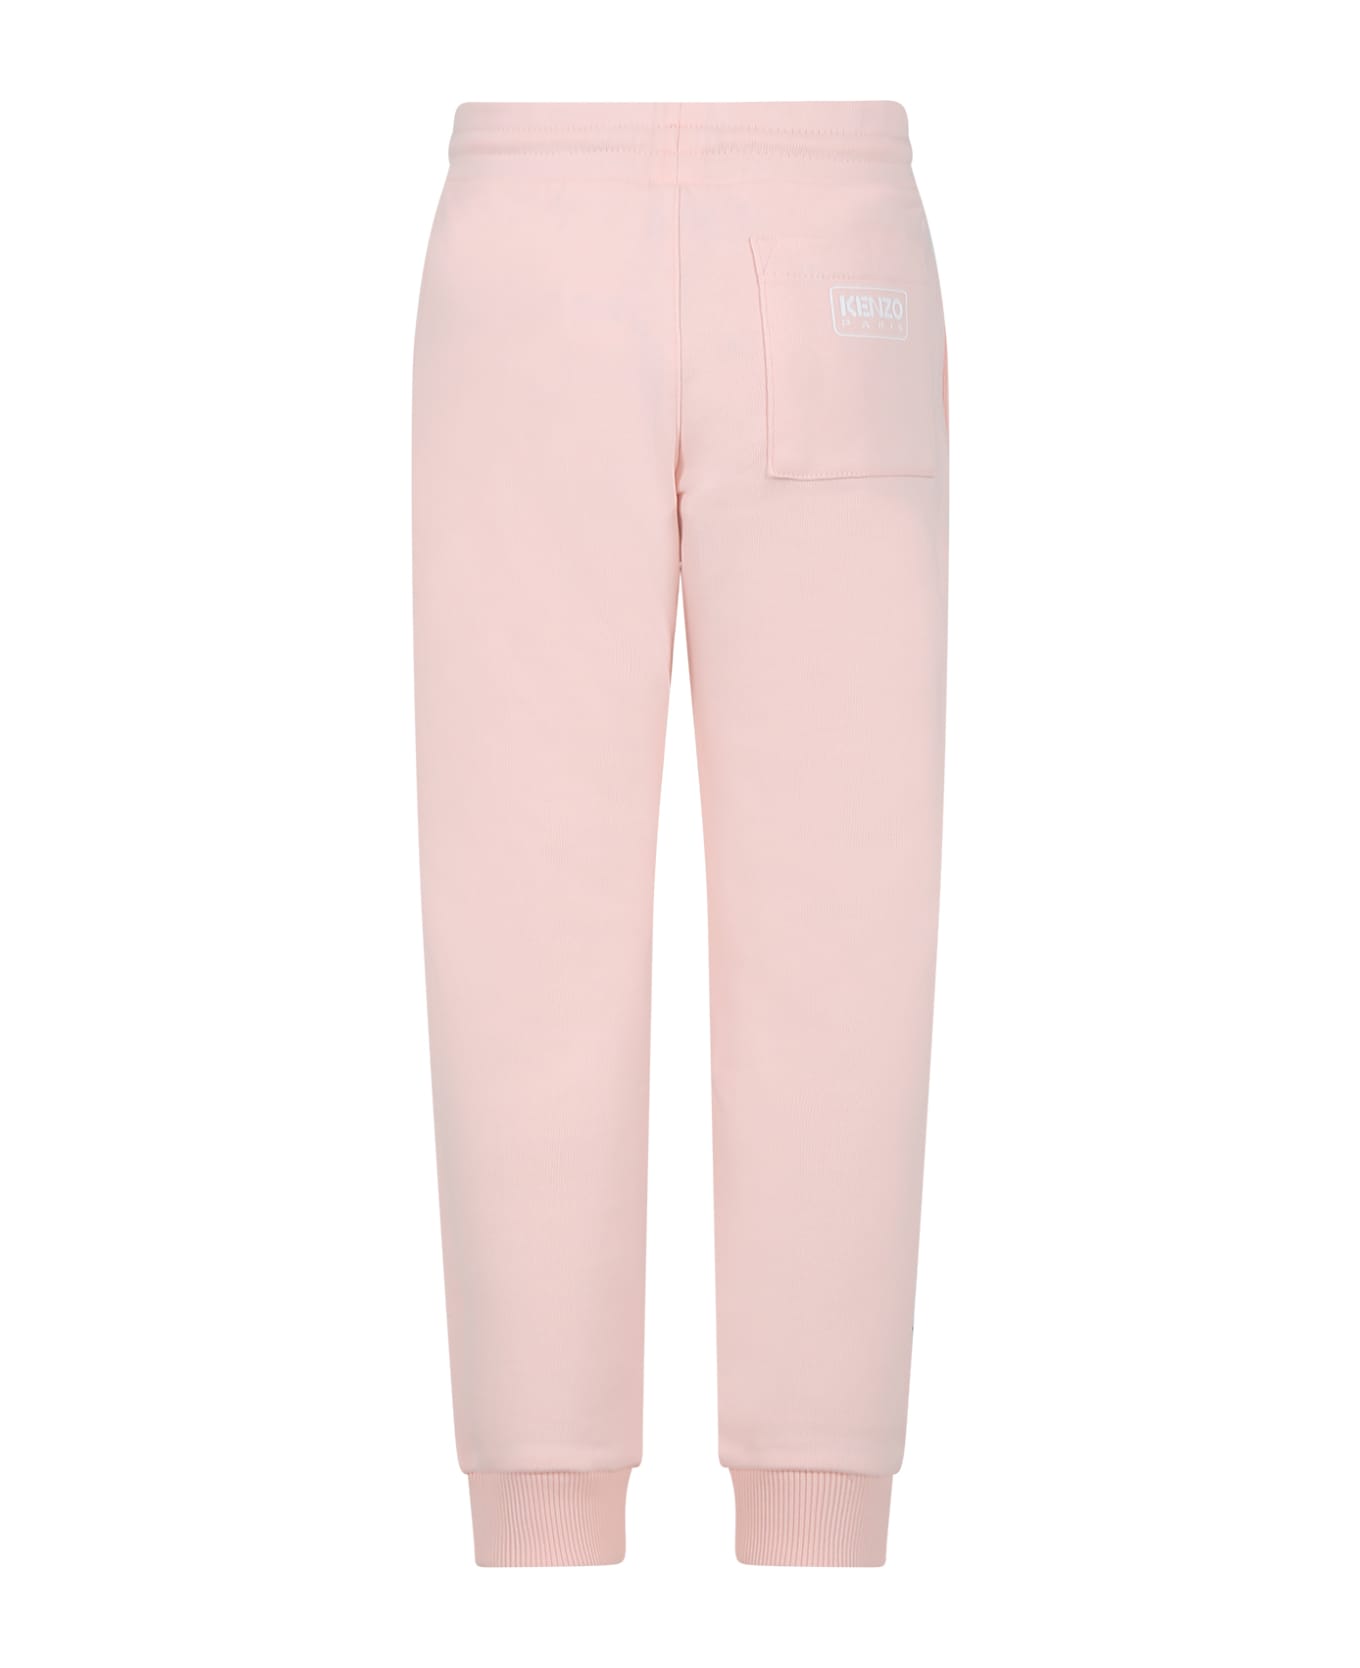 Kenzo Kids Pink Trousers For Girl With Logo - Pink ボトムス